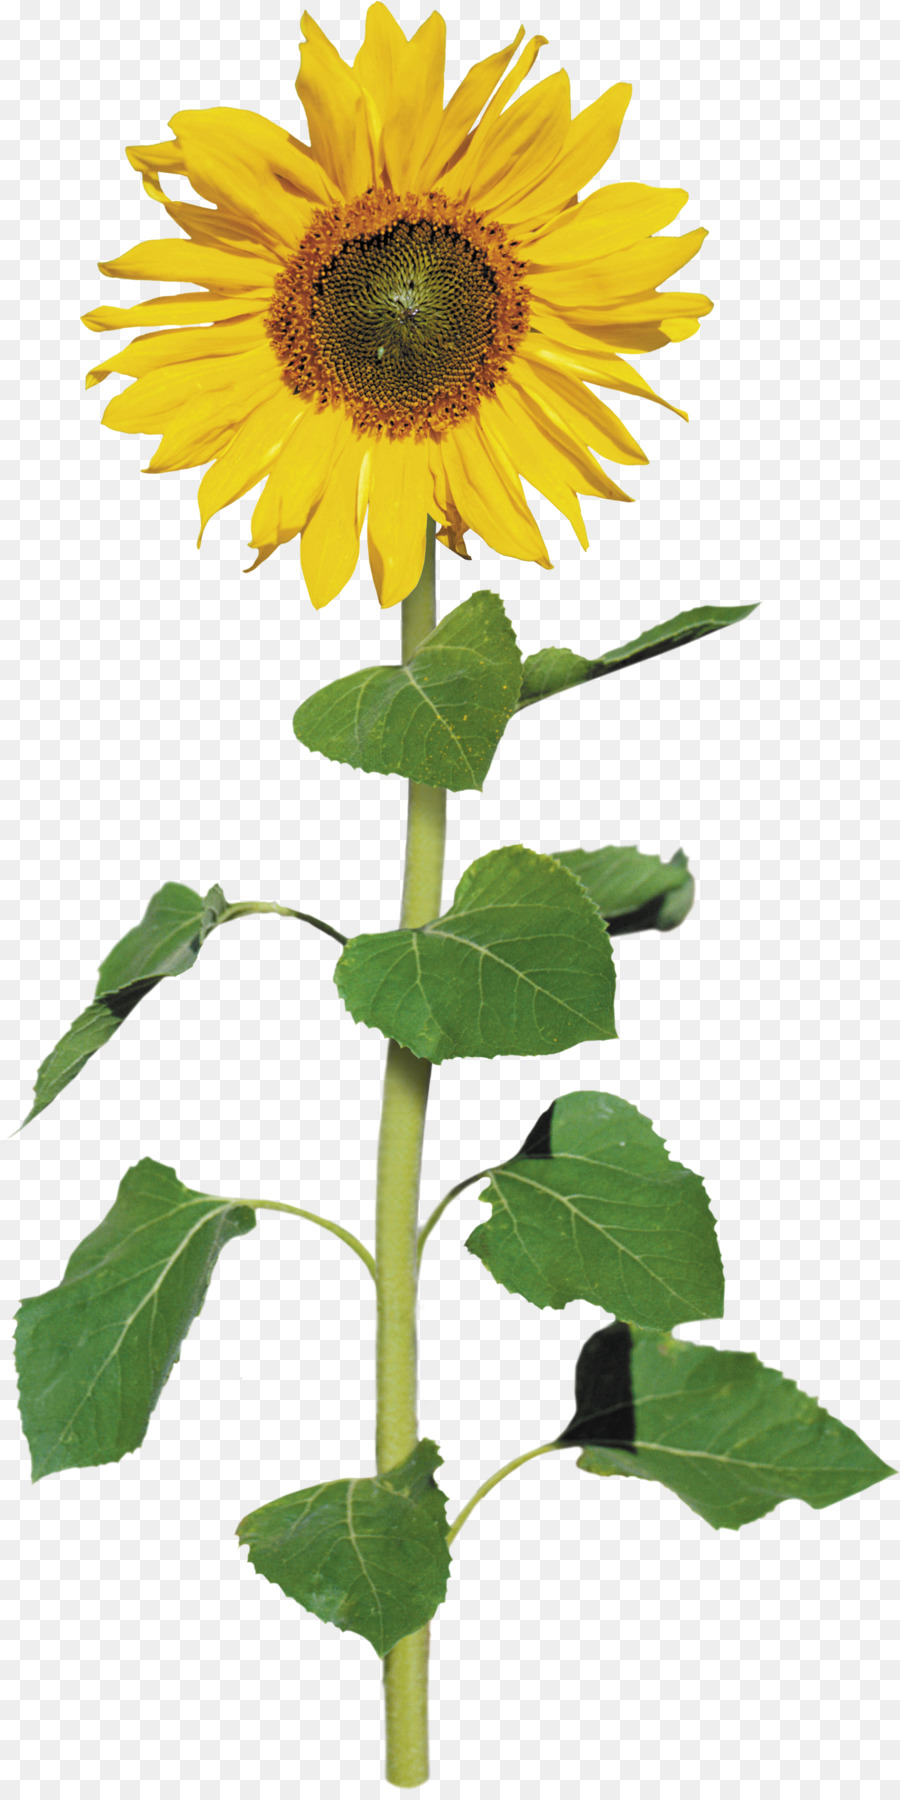 Common sunflower Archive file Clip art - sunflower png download - 1752*3486 - Free Transparent Common Sunflower png Download.